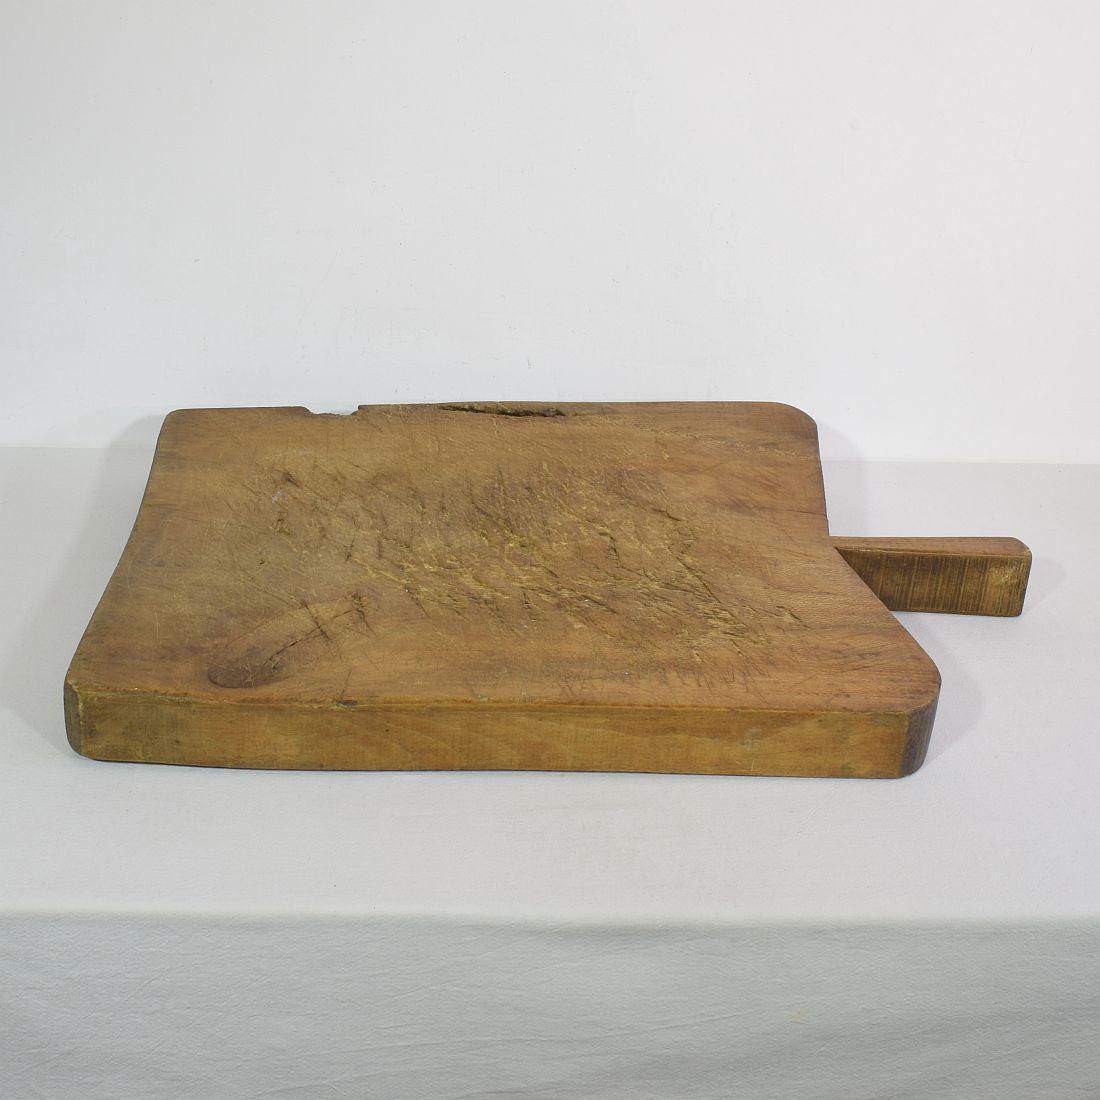 French Provincial Giant 19th Century, French Wooden Chopping or Cutting Board